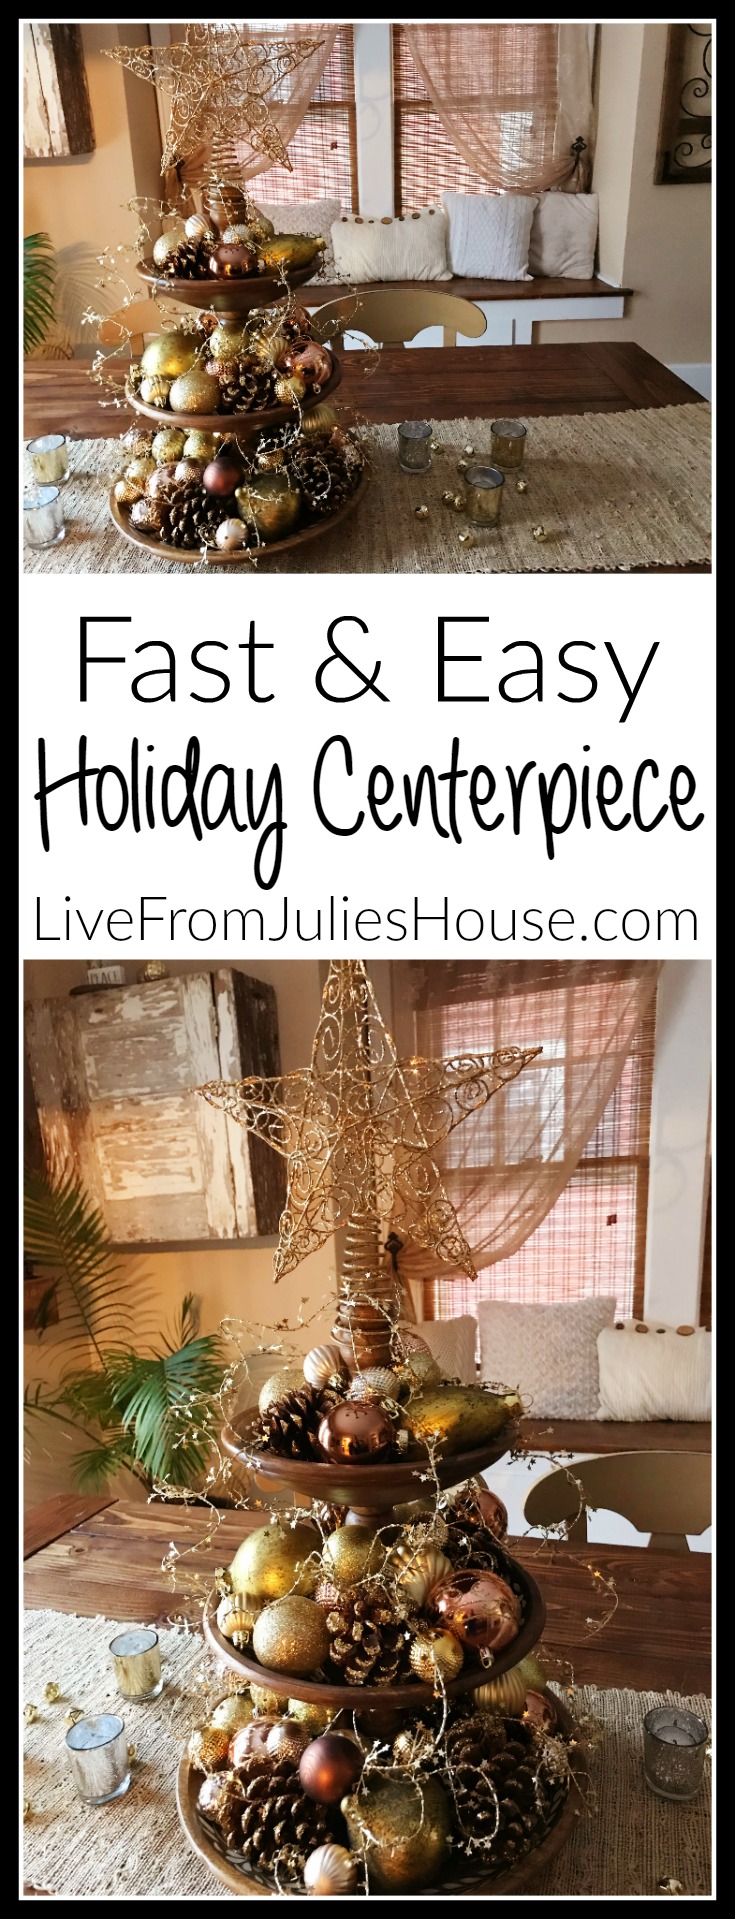 Fast & Easy Holiday Centerpiece